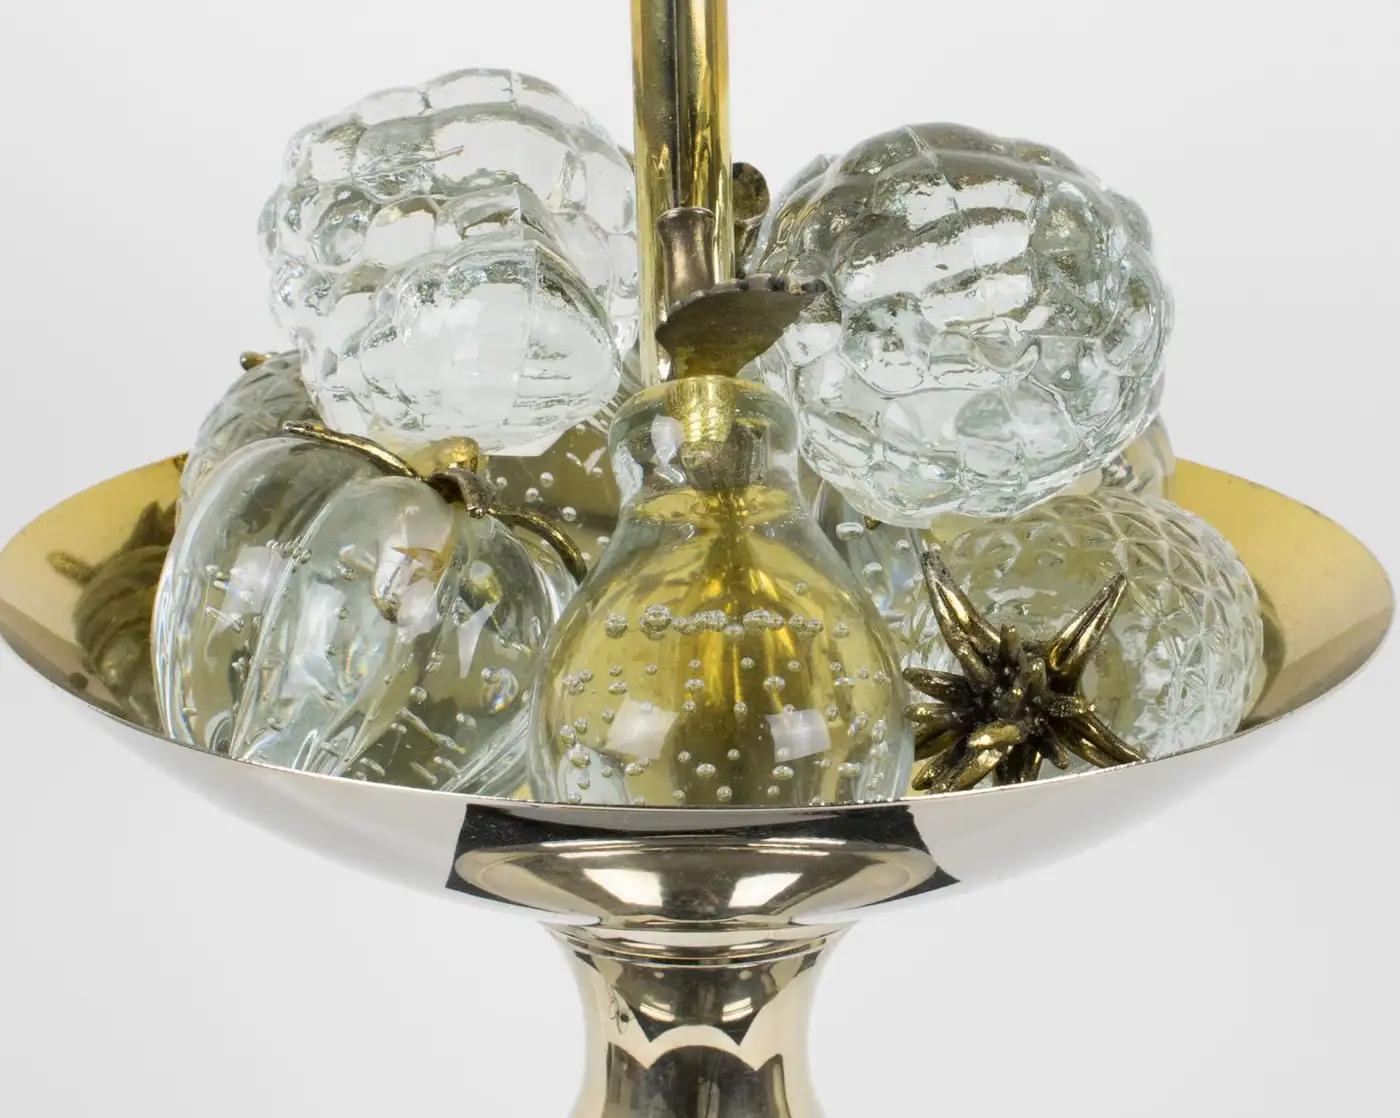 Maison Charles Table Lamp Black Enamel and Crystal Fruits, France 1960s For Sale 9